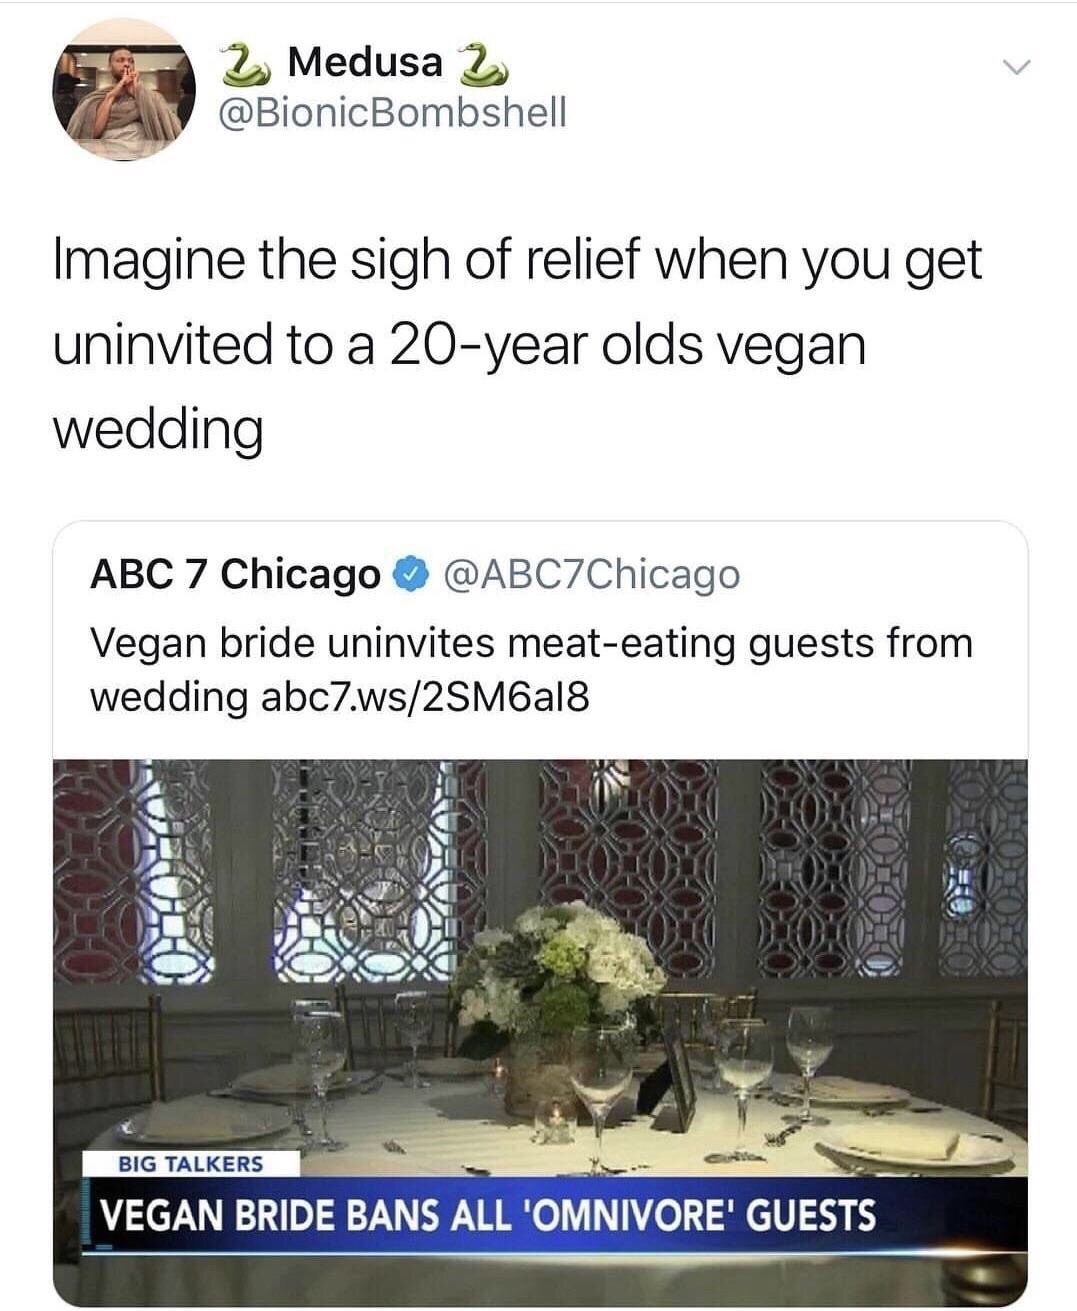 random pic WLS-TV - 2 Medusa 2 Imagine the sigh of relief when you get uninvited to a 20year olds vegan wedding Abc 7 Chicago Vegan bride uninvites meateating guests from wedding abc7.ws2SM6a18 Big Talkers Vegan Bride Bans All 'Omnivore' Guests